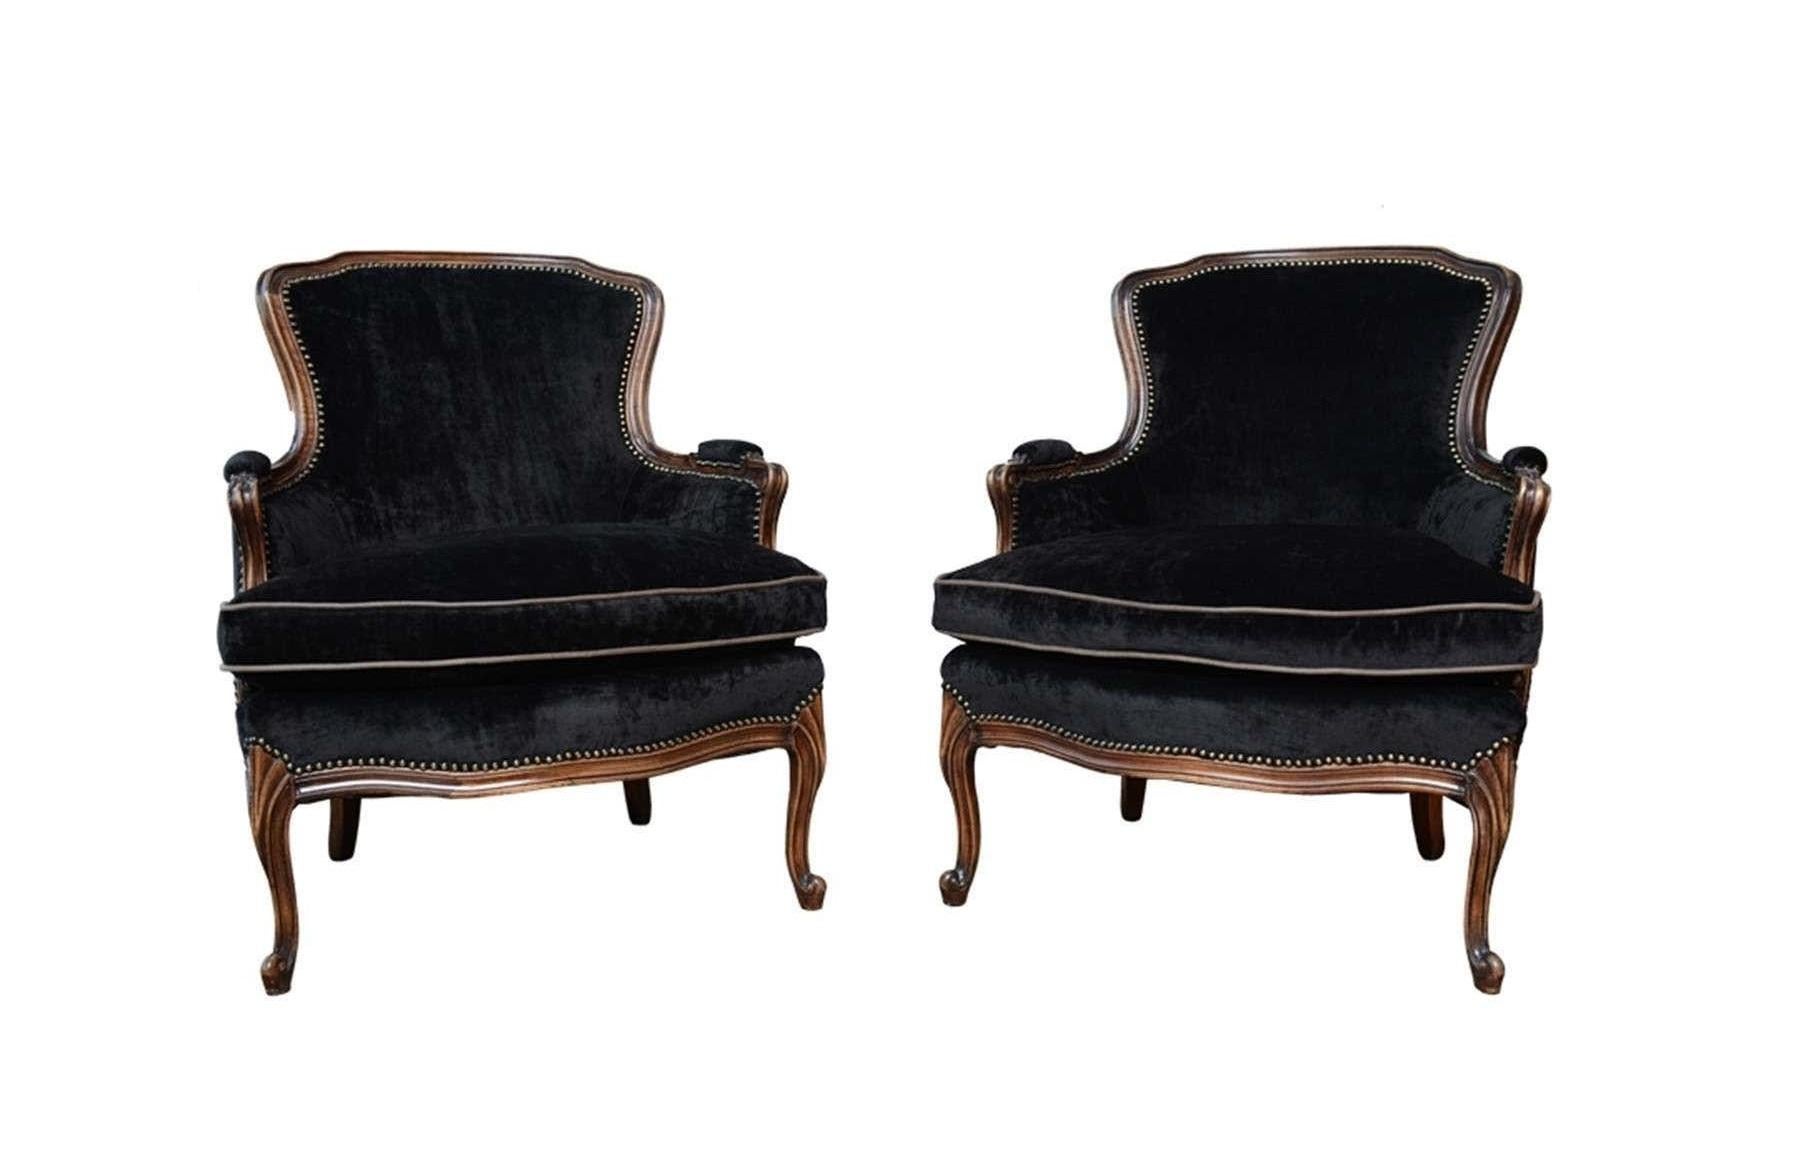 An elegant pair of antique Louis XV upholstered arm chairs. Freshly upholstered in a black velvet with nailhead trim bordering the edges and the frames refinished in a dark walnut finish. The chairs feature a simple curved crest rail, upholstered